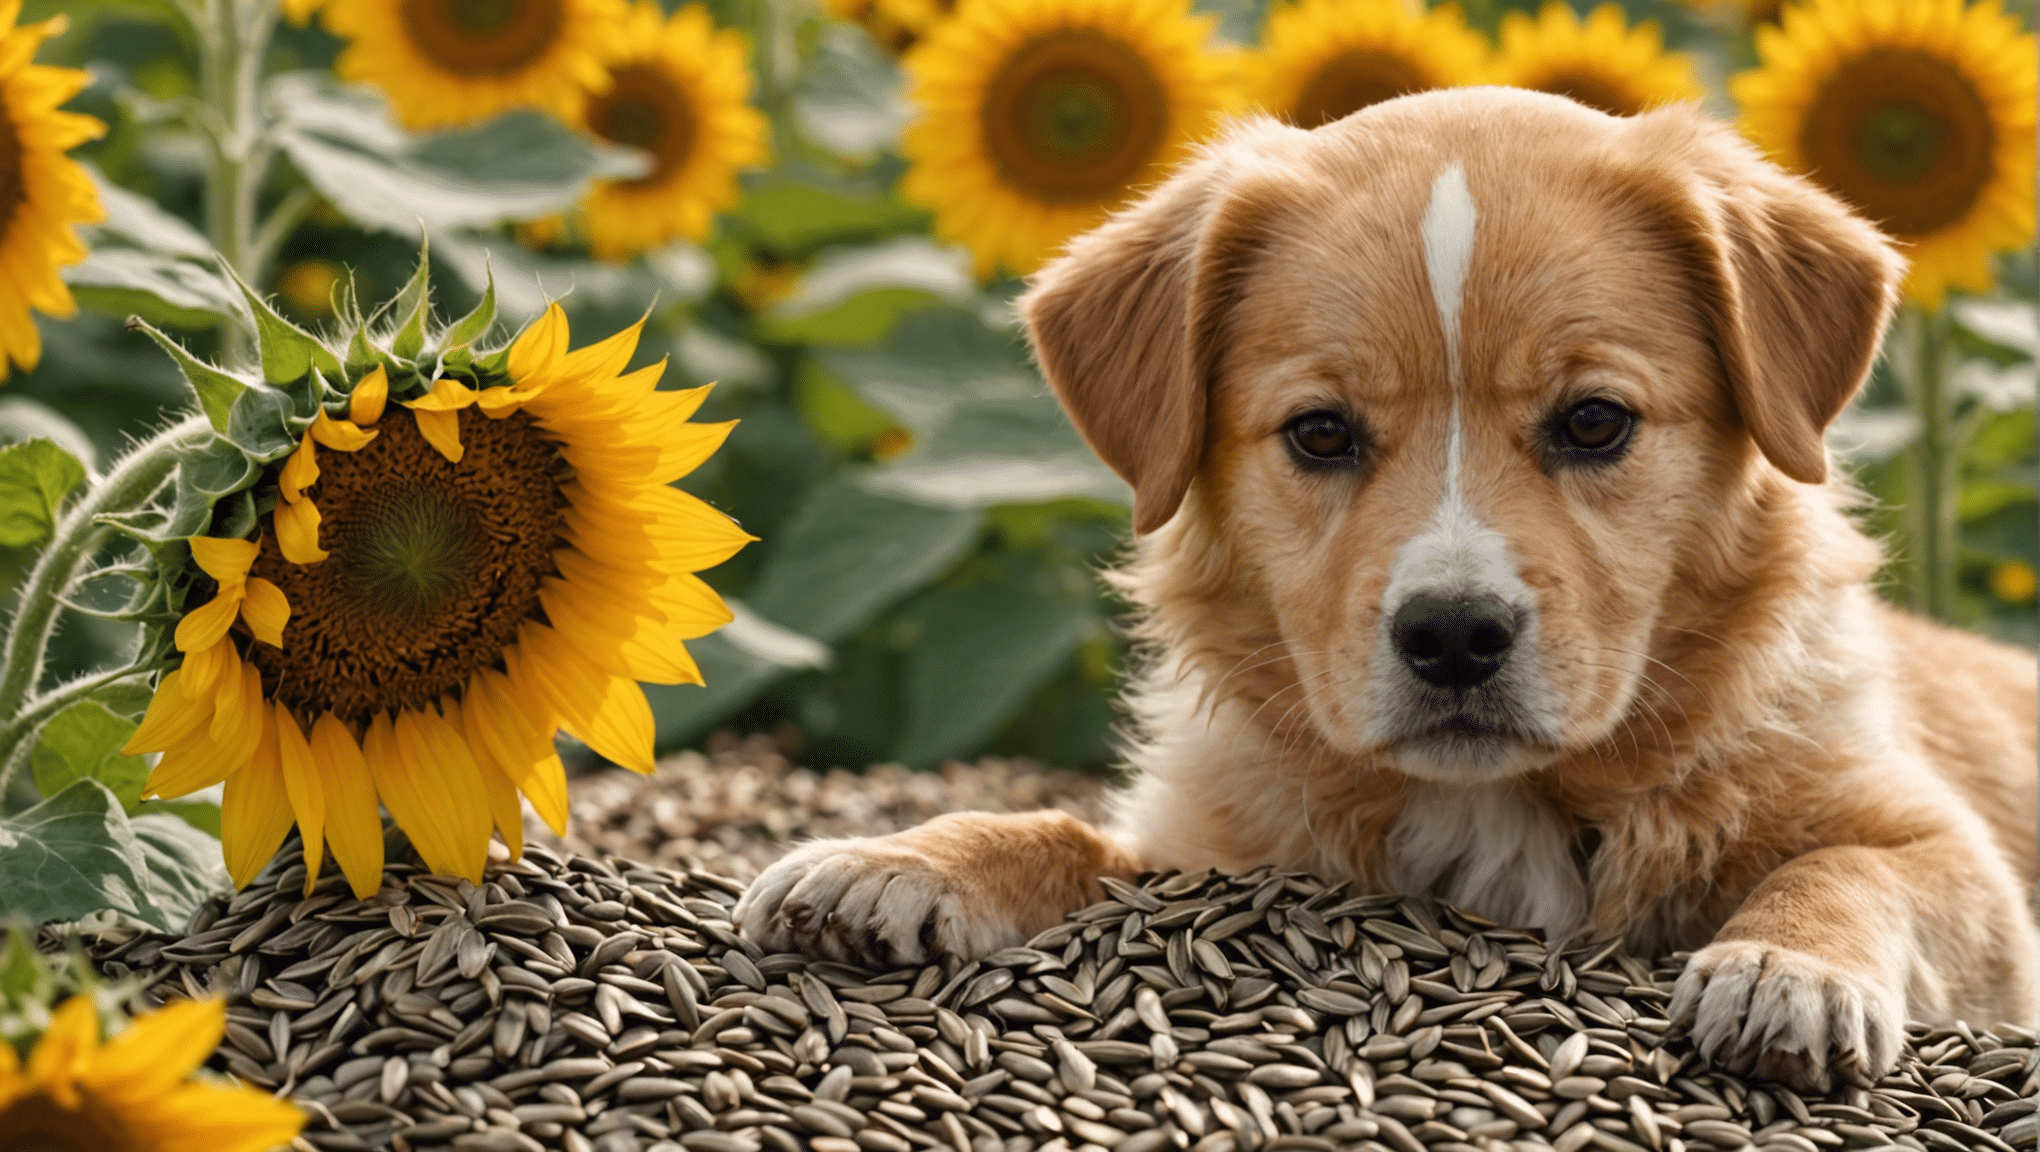 learn about the safety of sunflower seeds as a dog food and potential risks of feeding sunflower seeds to your dog. get expert advice on including sunflower seeds in your dog's diet.